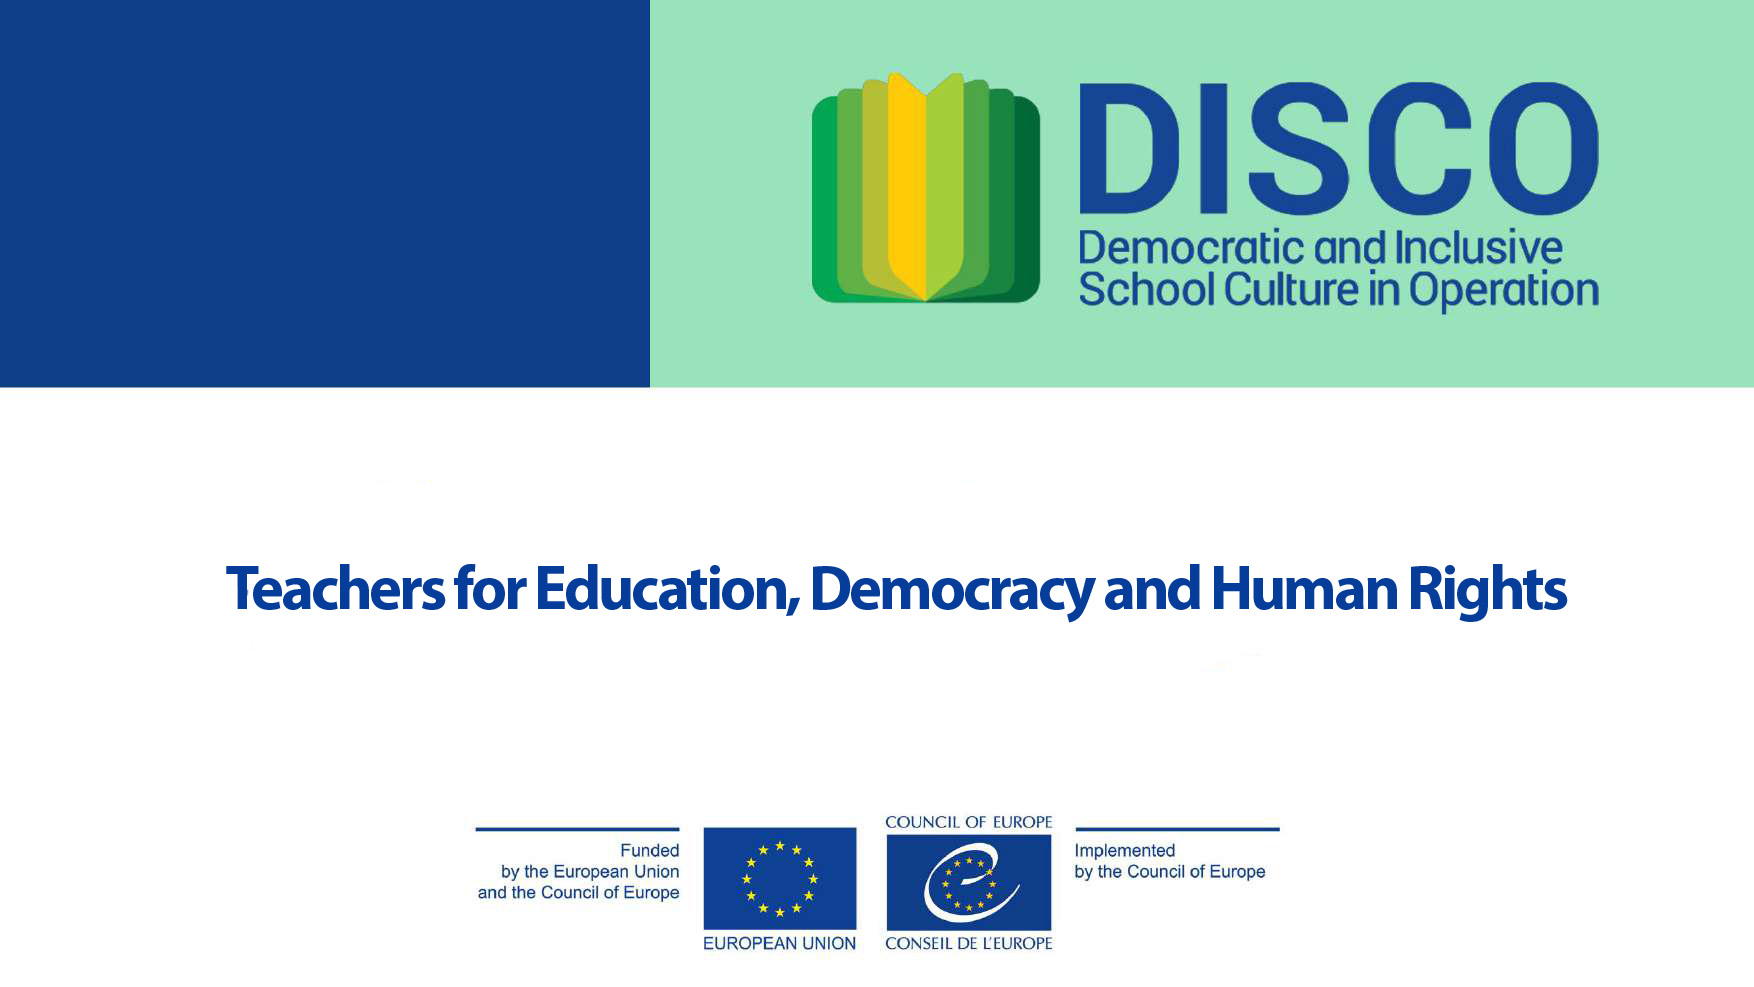 Teachers for Education, Democracy and Human Rights